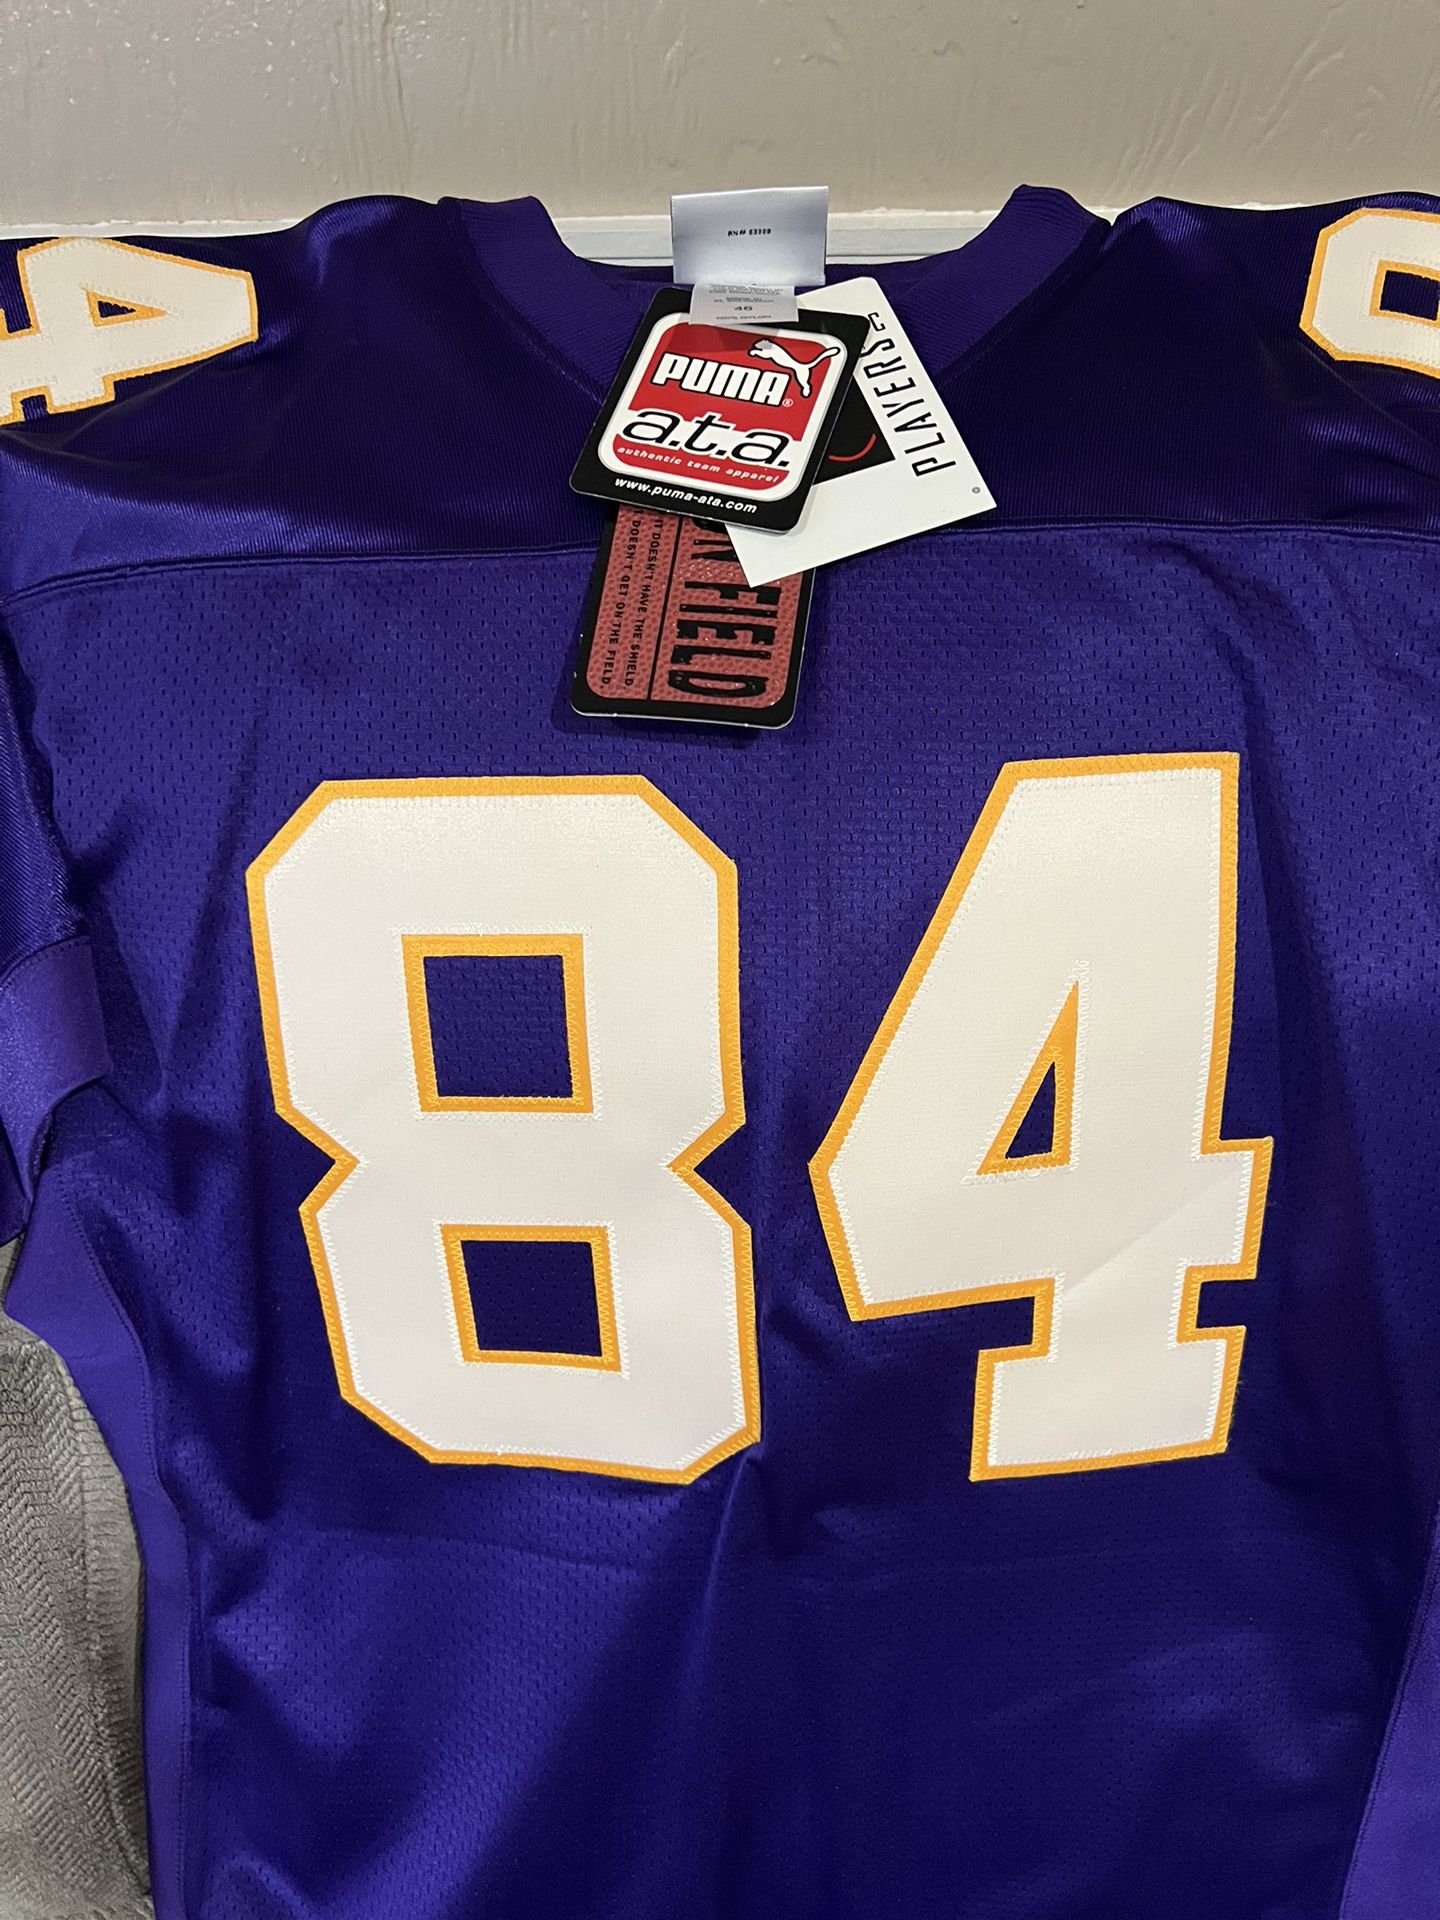 Randy Moss Authentic Puma vs. Mitchell and Ness Jersey 